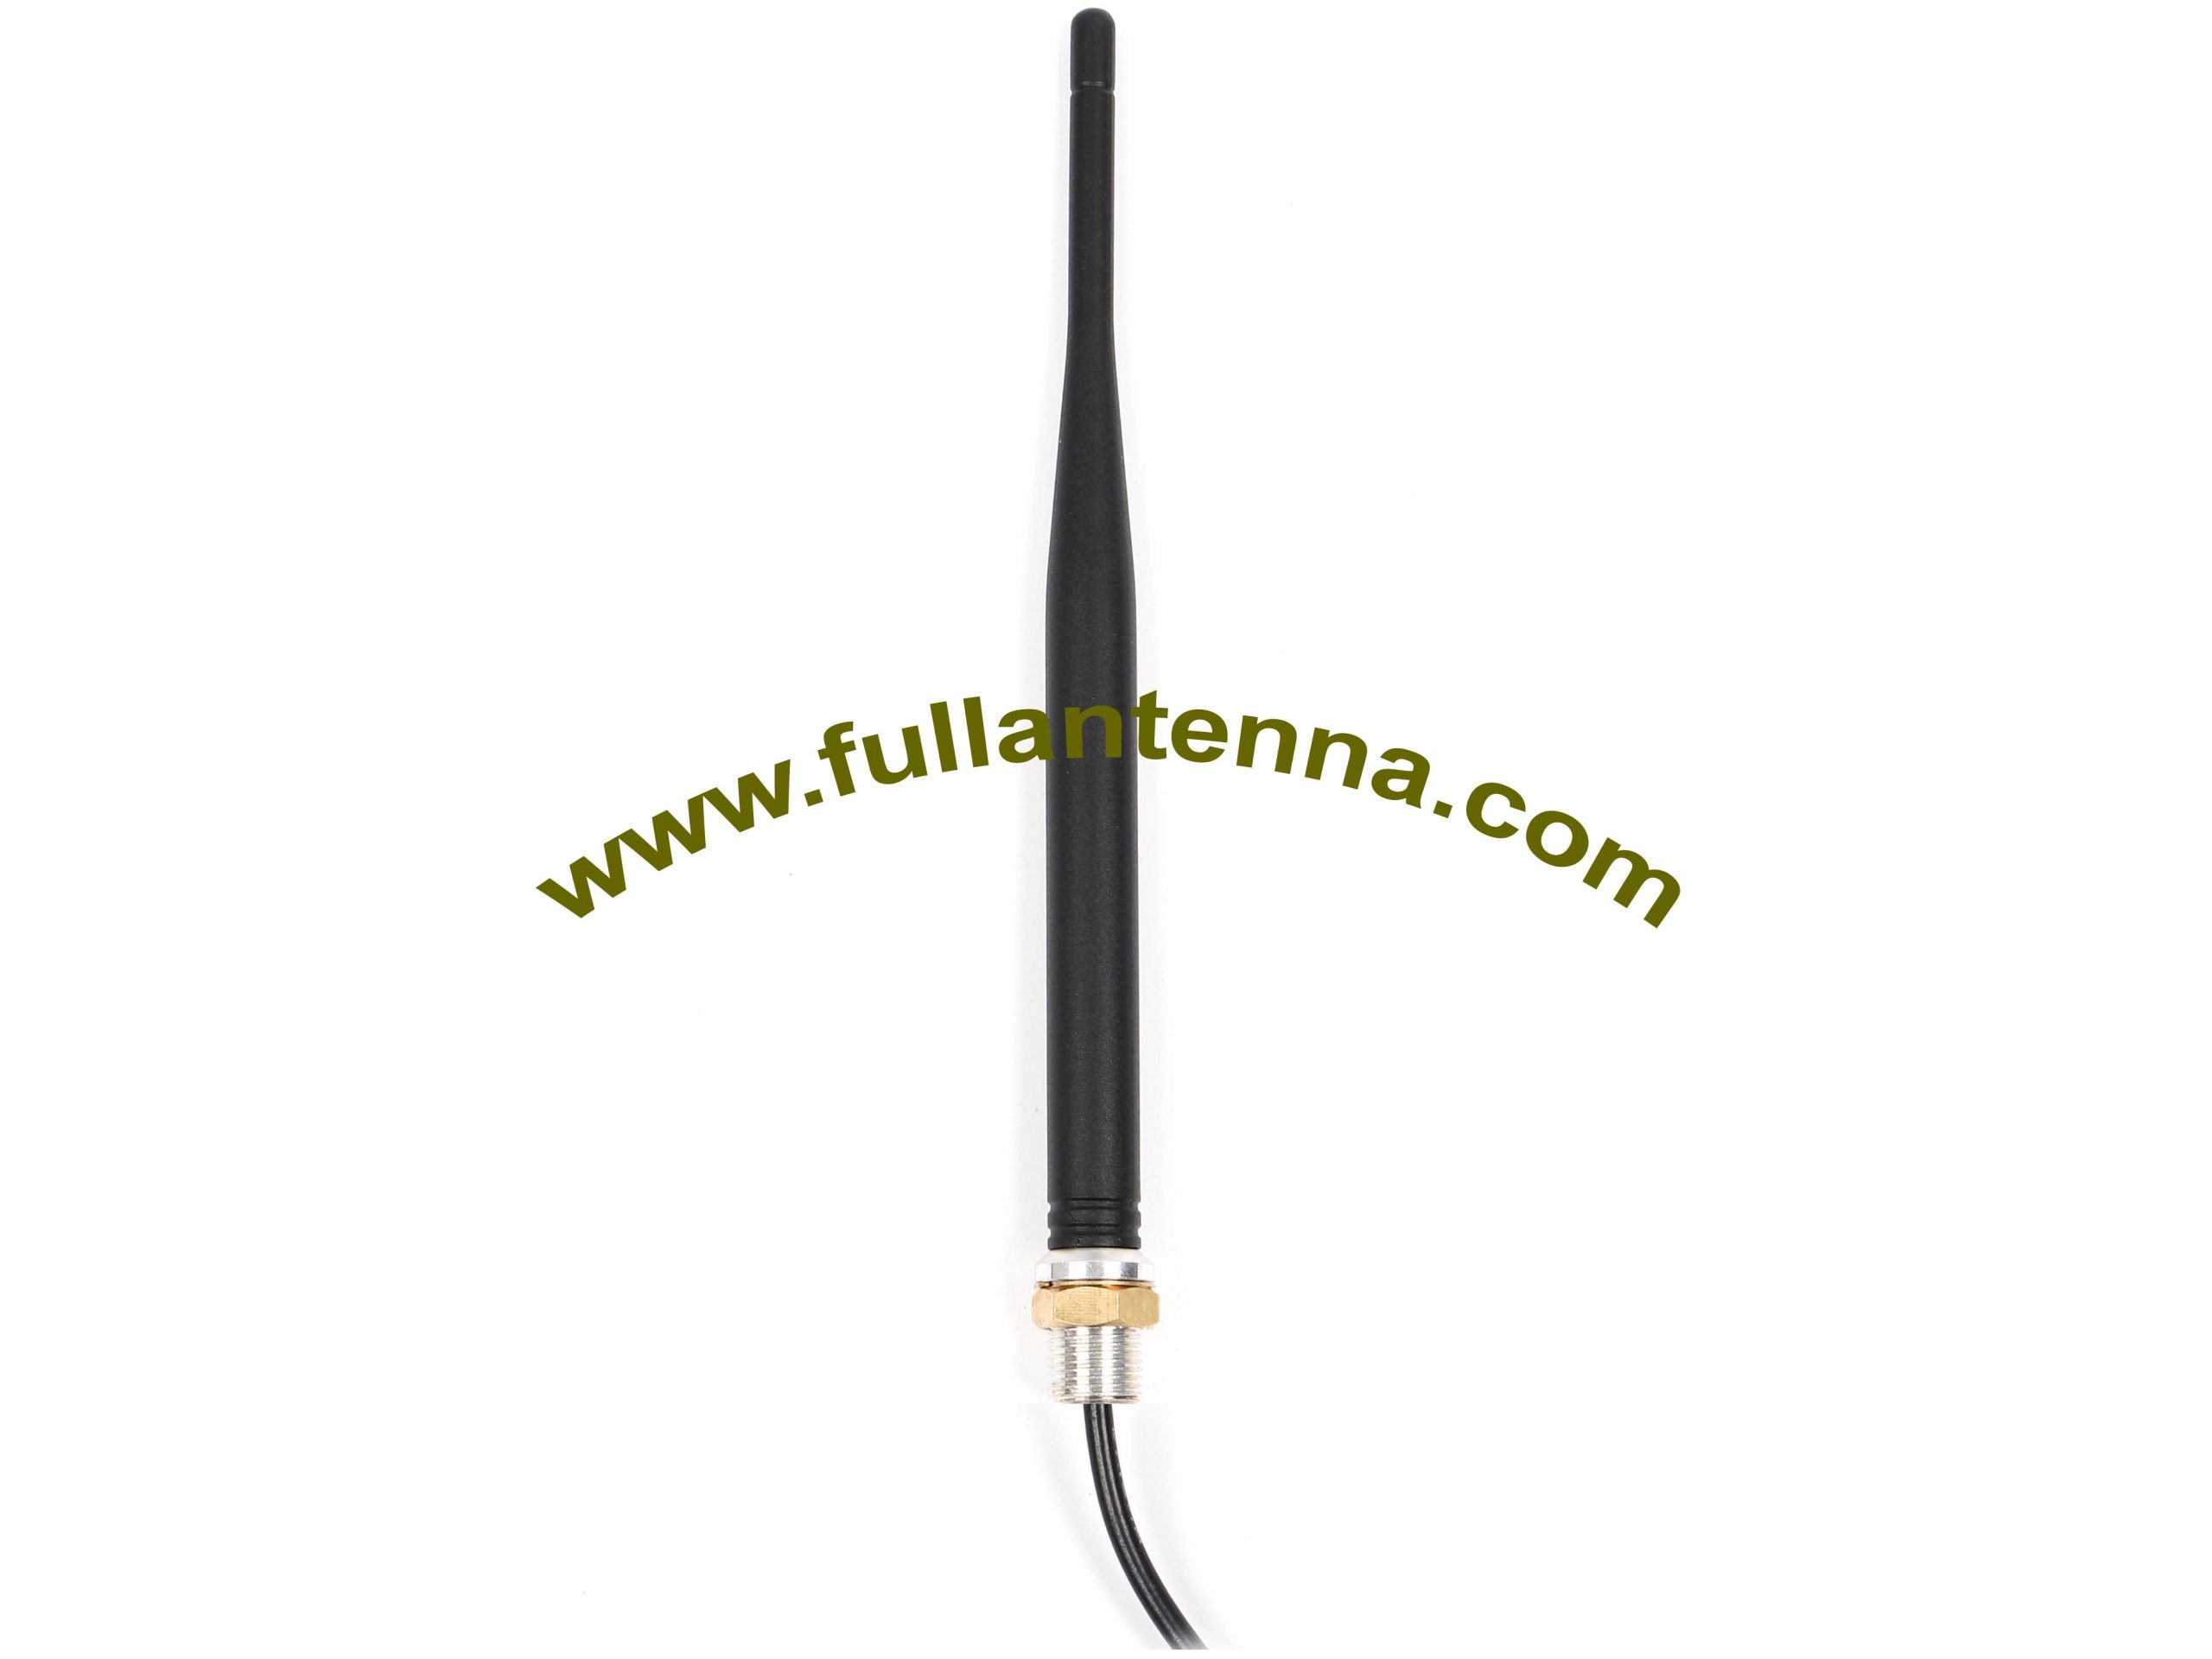 P/N:FAGSM.1101, GSM External Antenna, screw mount for GSM AMPS device SMA male